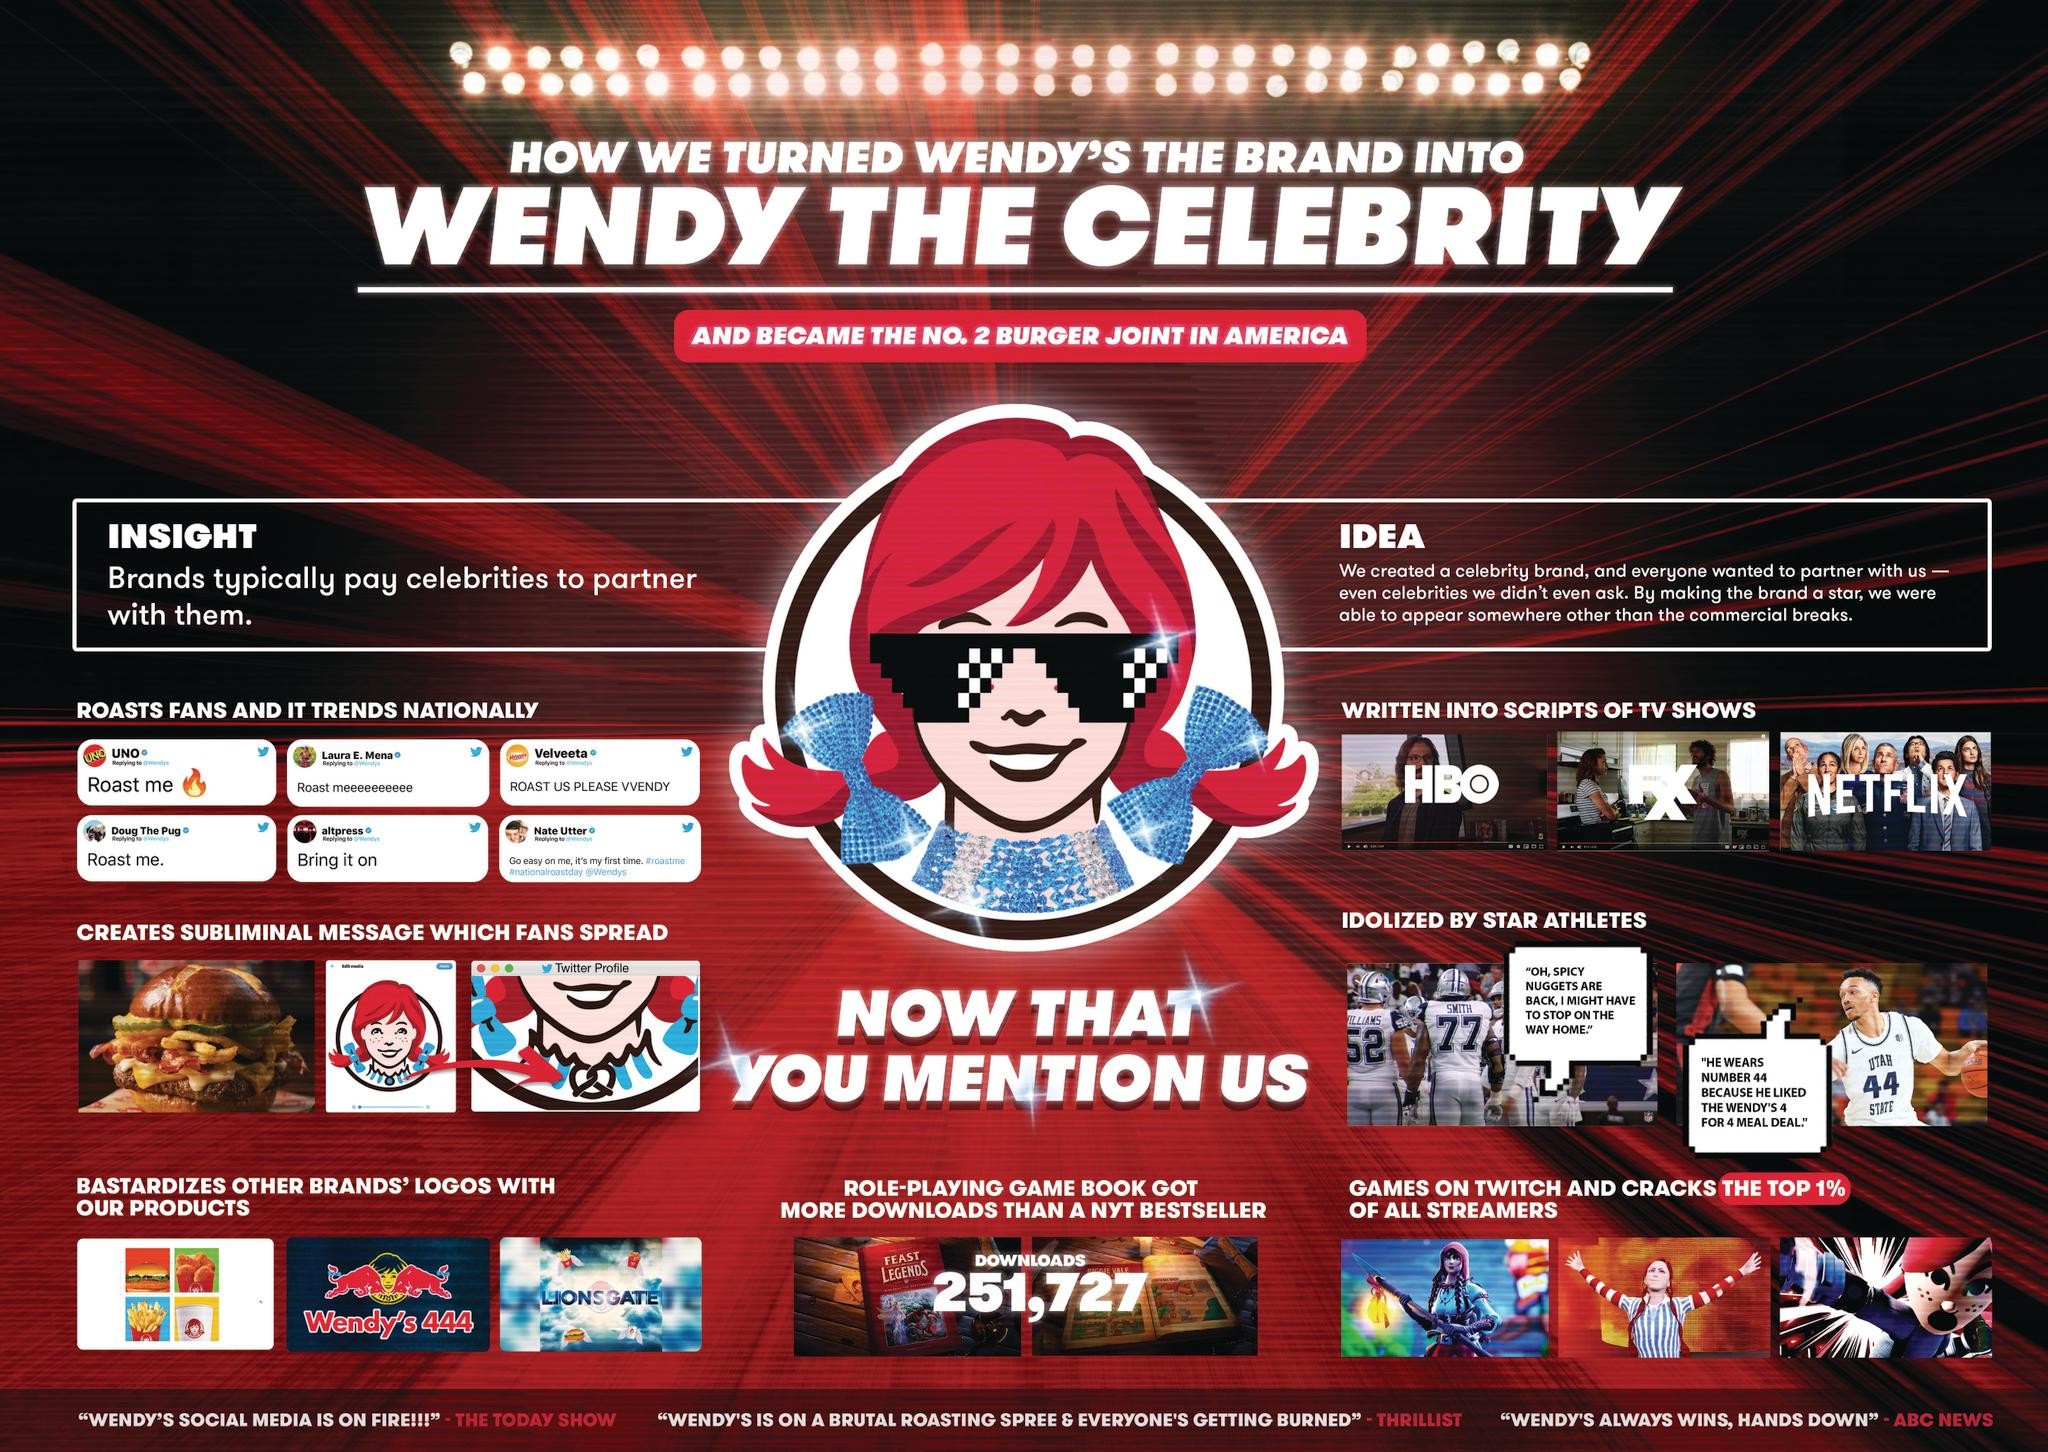 Wendy's. Now That You Mention Us.